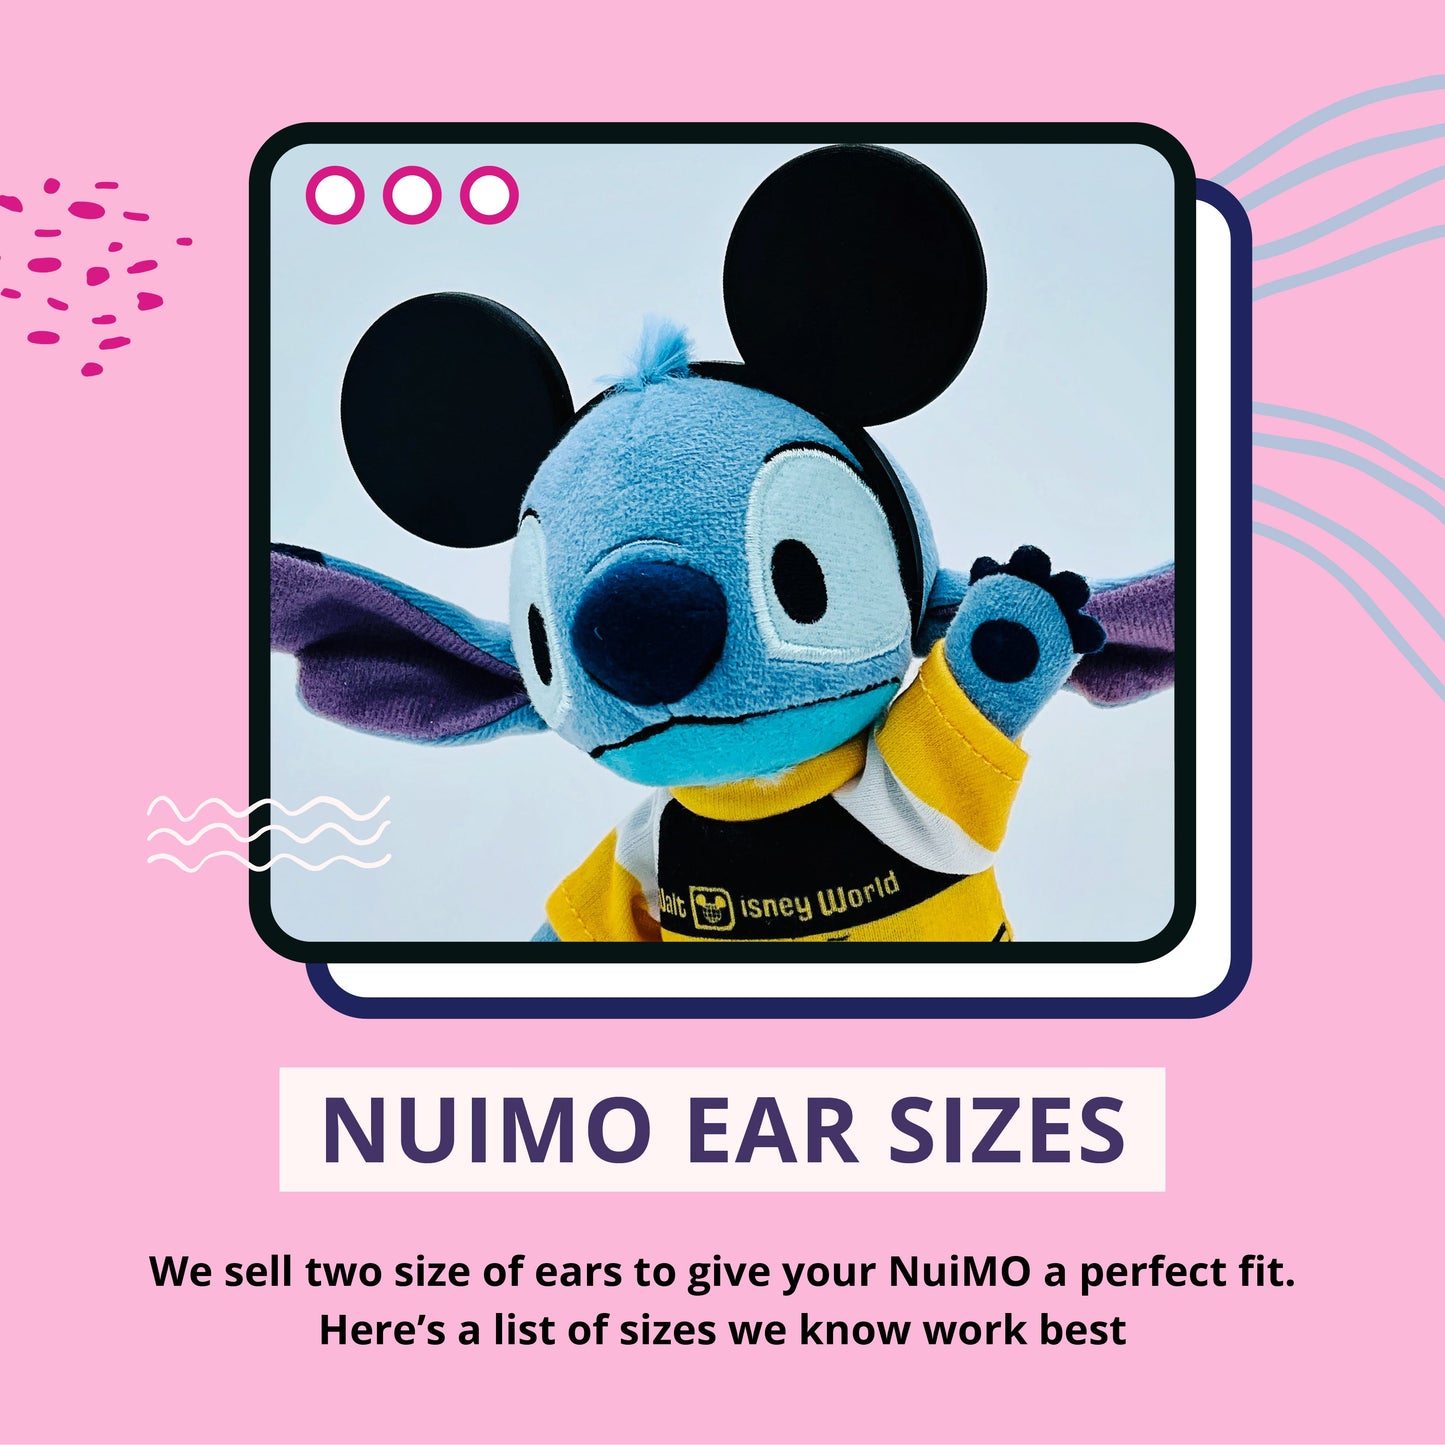 Star Wars Storm Trooper Themed Mouse Ears for NuiMO Plush